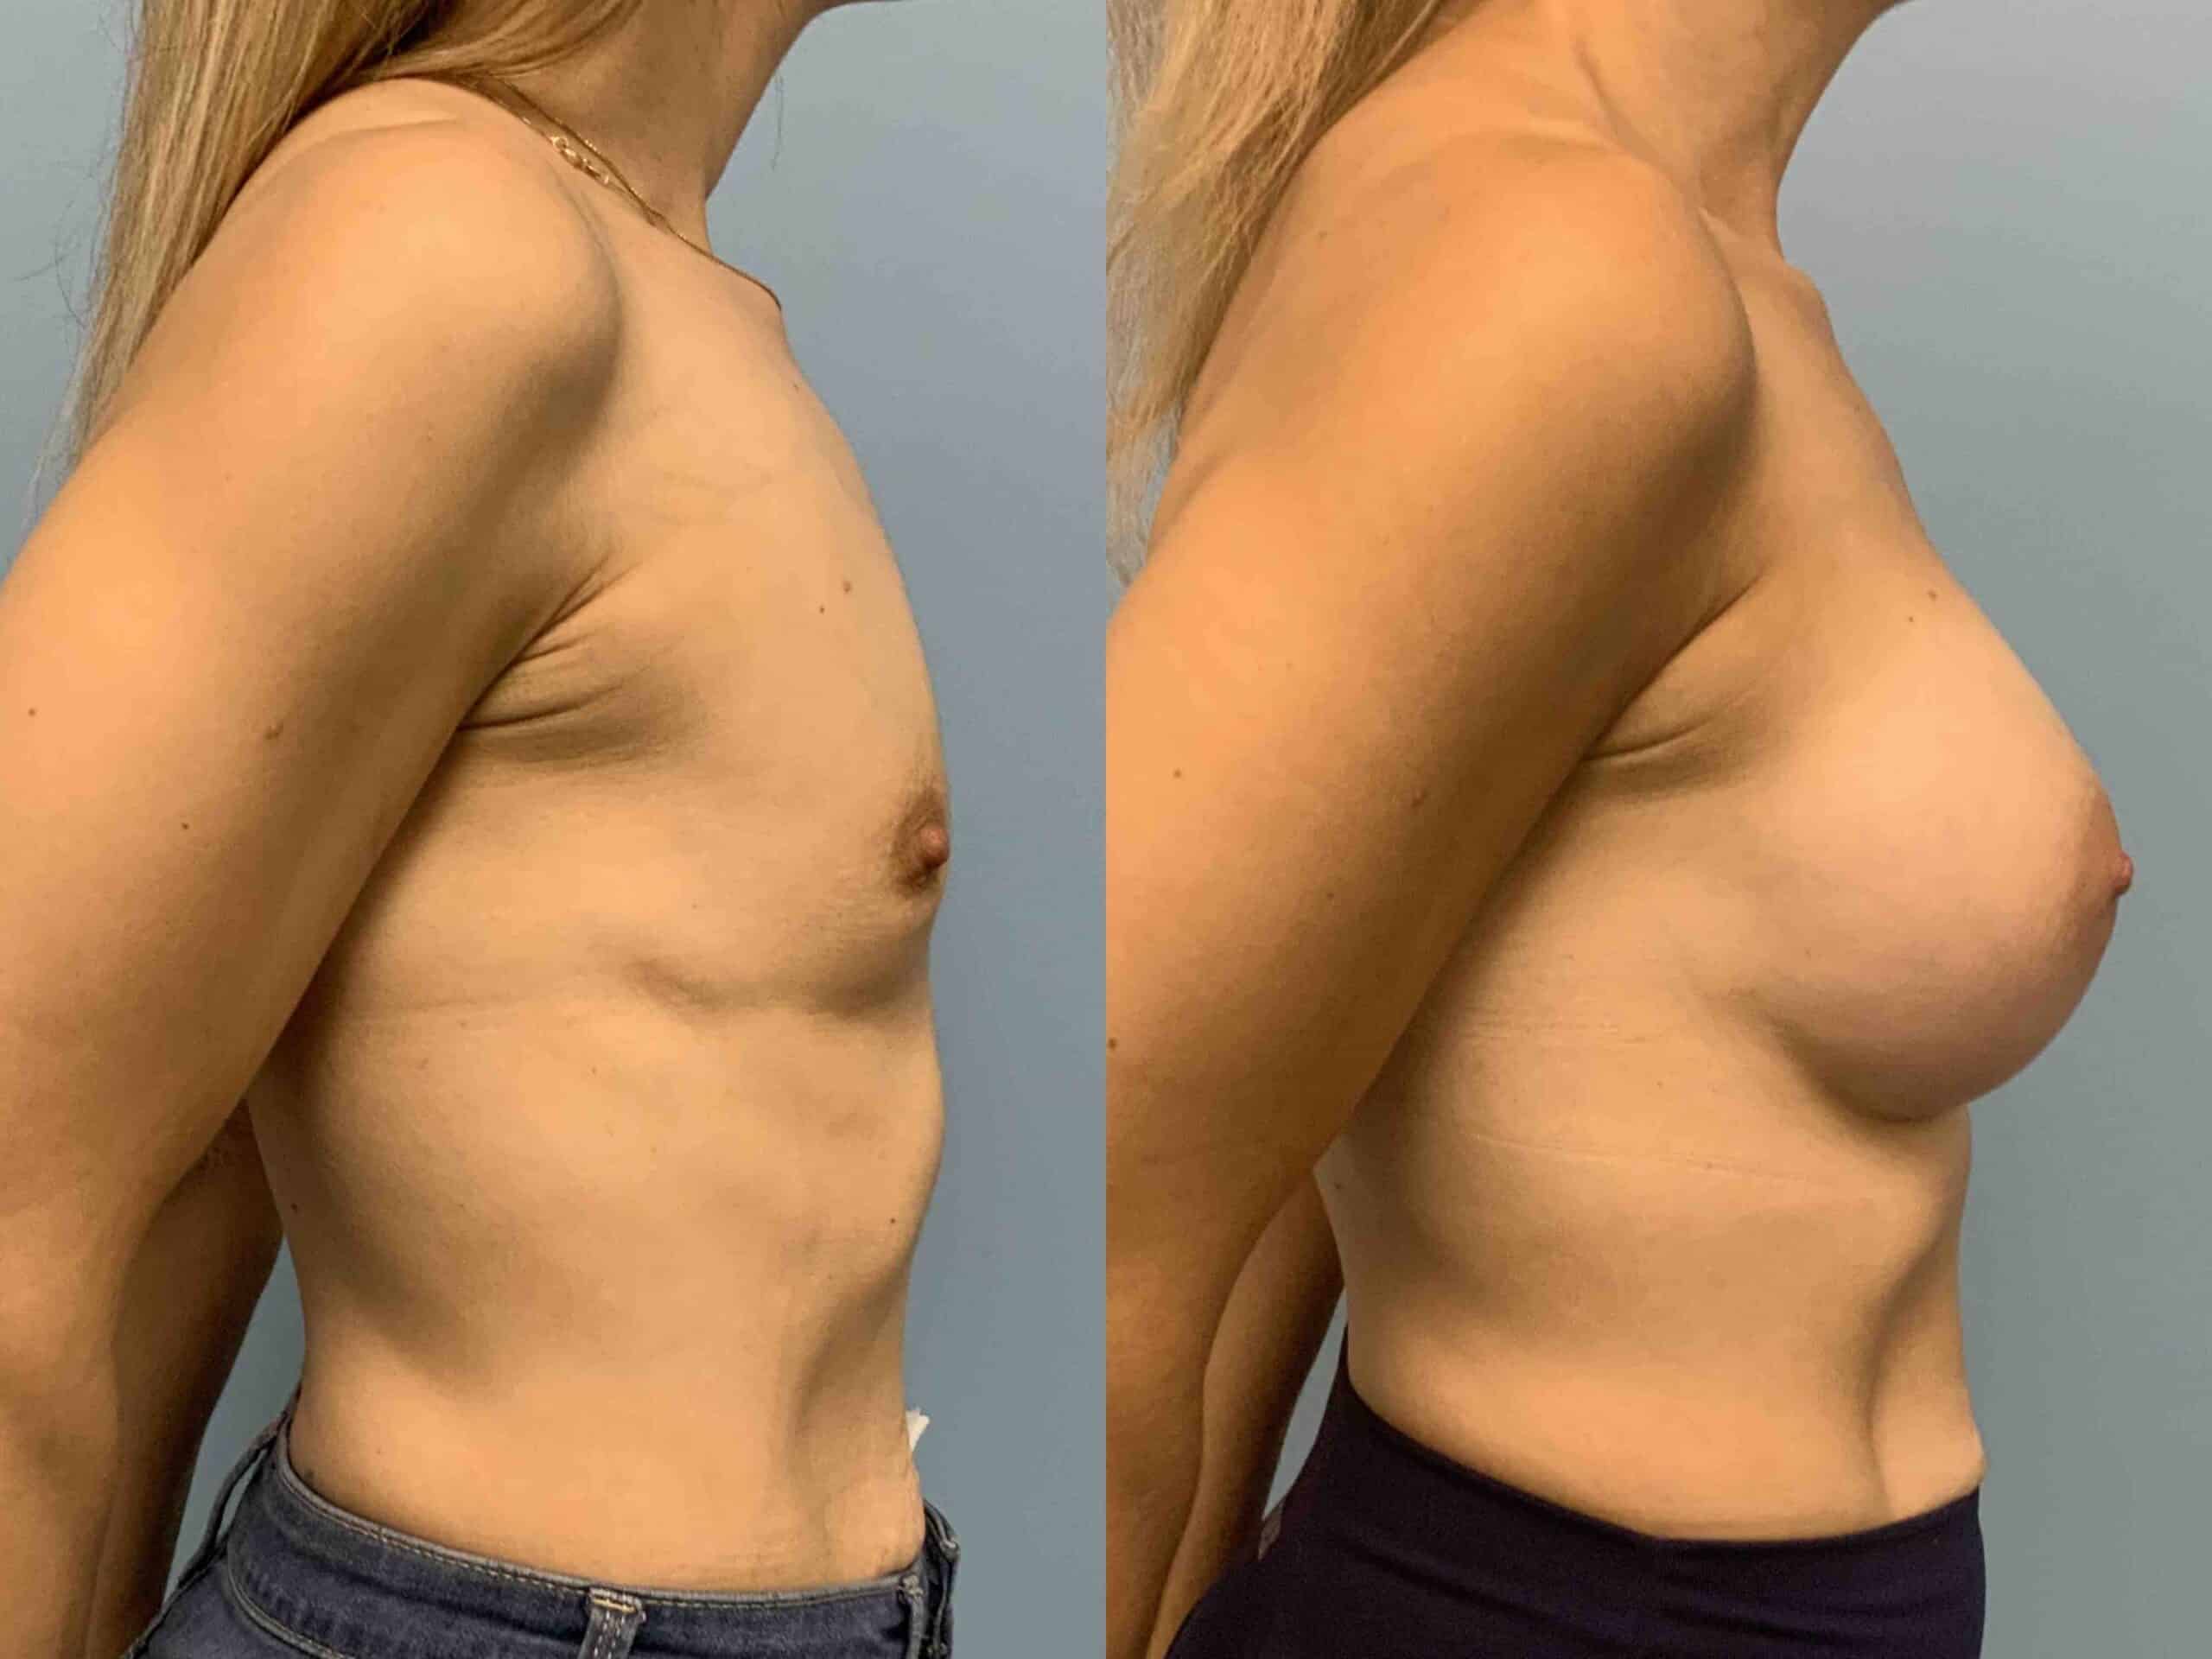 Before and after, patient 2 mo post op from Breast Augmentation, Level III Muscle Release procedures performed by Dr. Paul Vanek